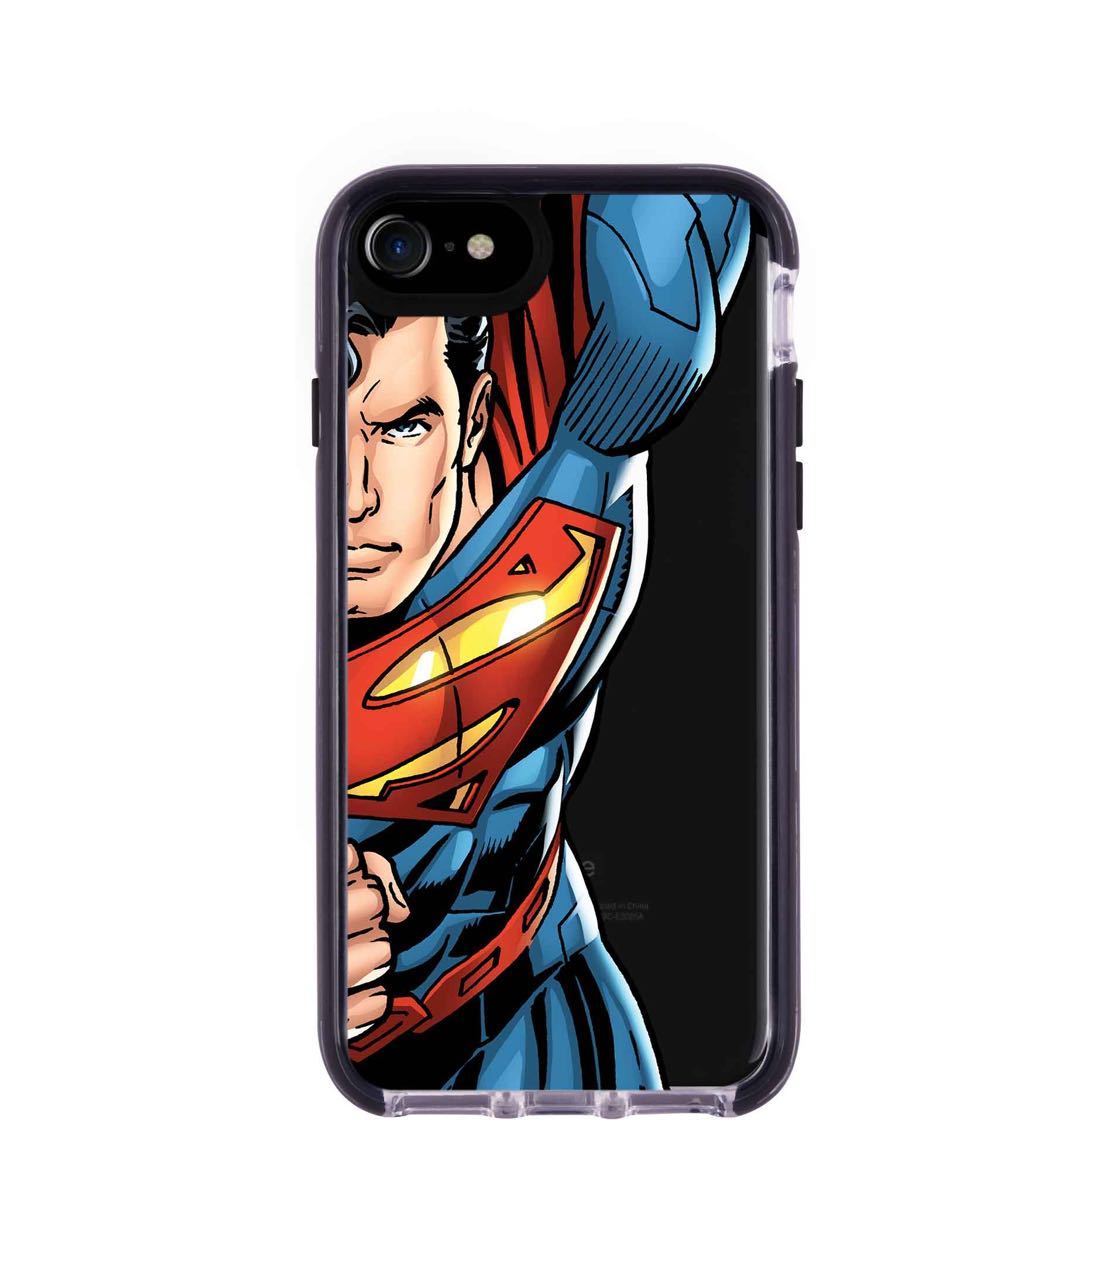 Speed it like Superman - Extreme Phone Case for iPhone 7